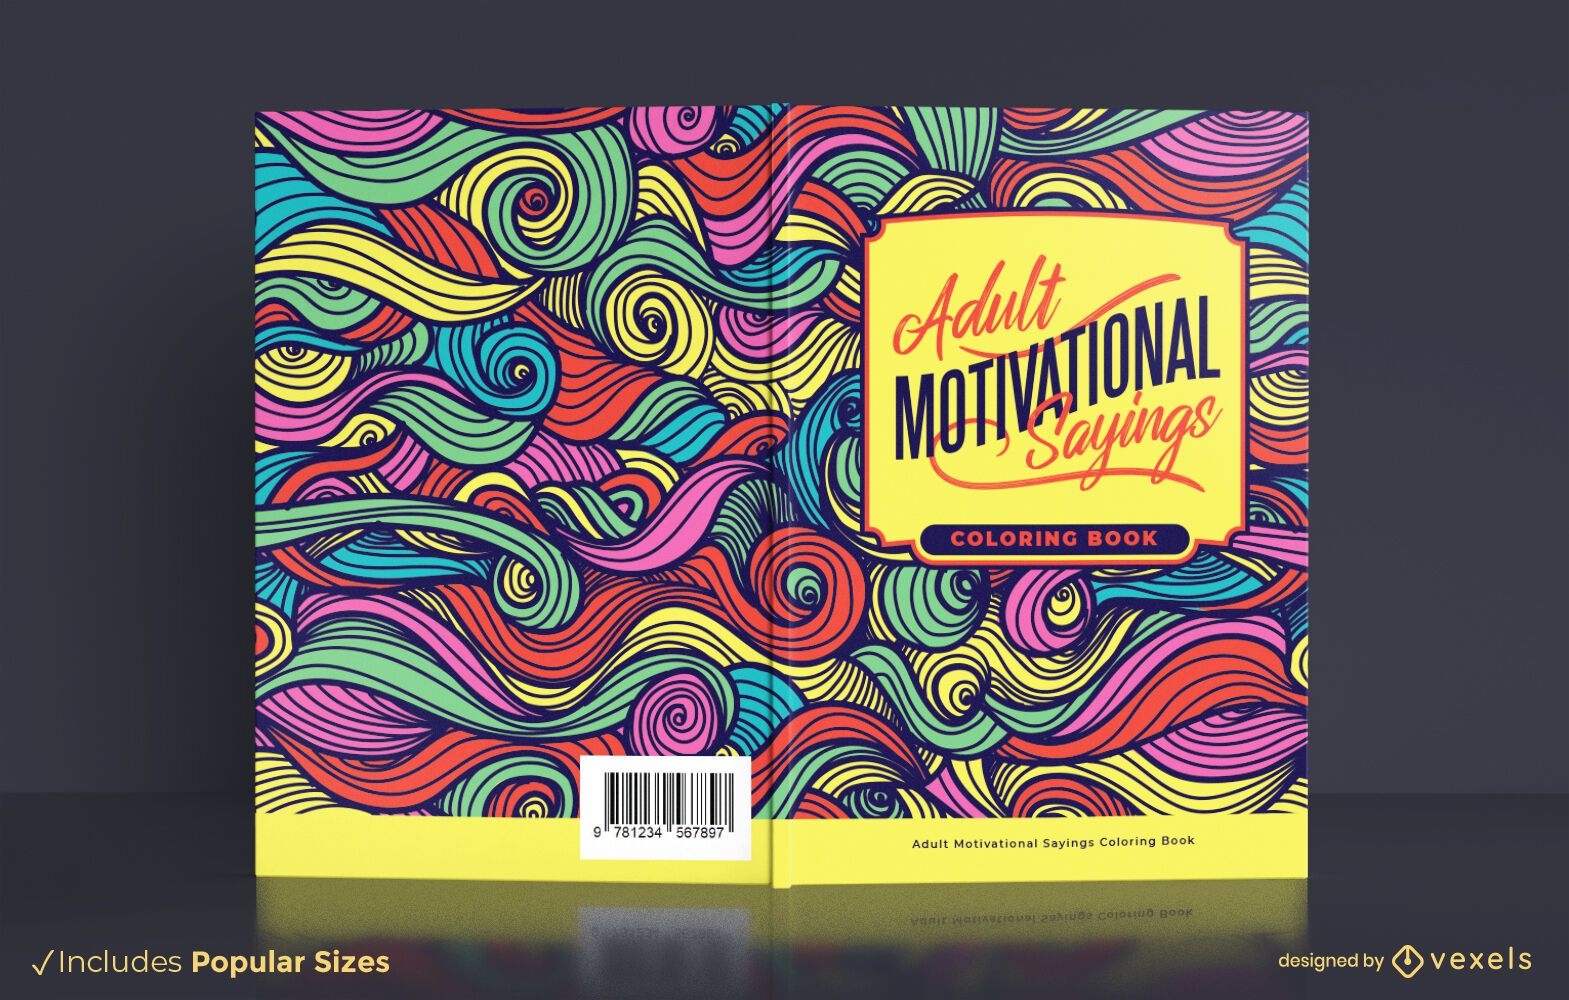 Motivational sayings book cover design